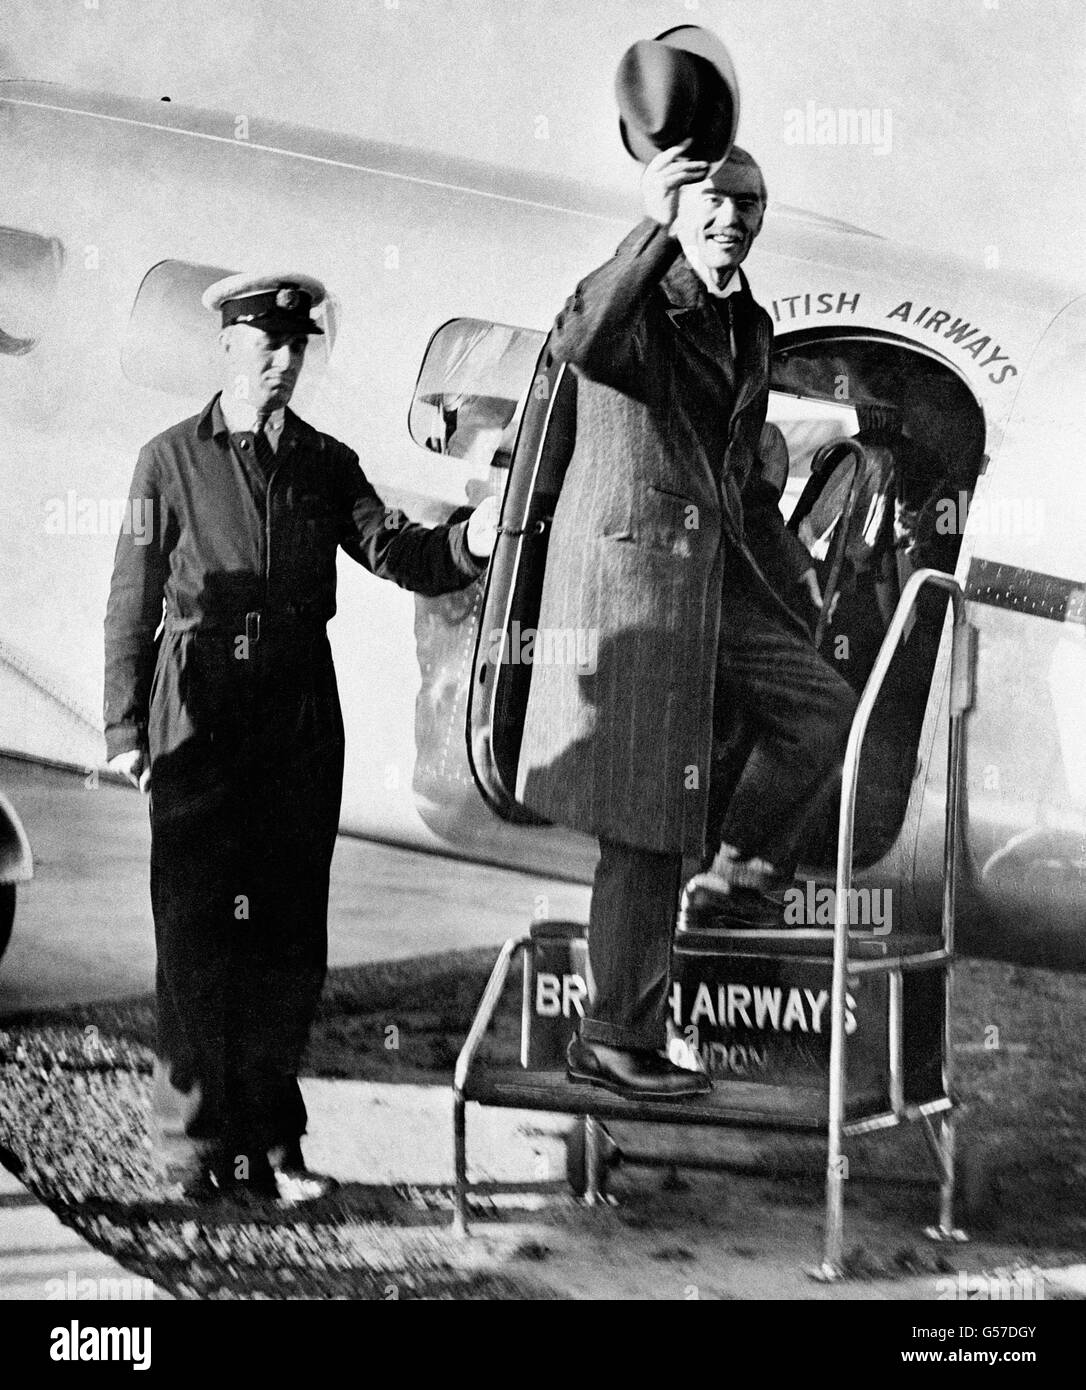 British Prime Minister Neville Chamberlain waves his hat as he boards an aircraft bound for Munich where he is to have talks with the German Fuhrer, Adolf Hitler, over the future of the disputed Czech Sudetenland. Stock Photo